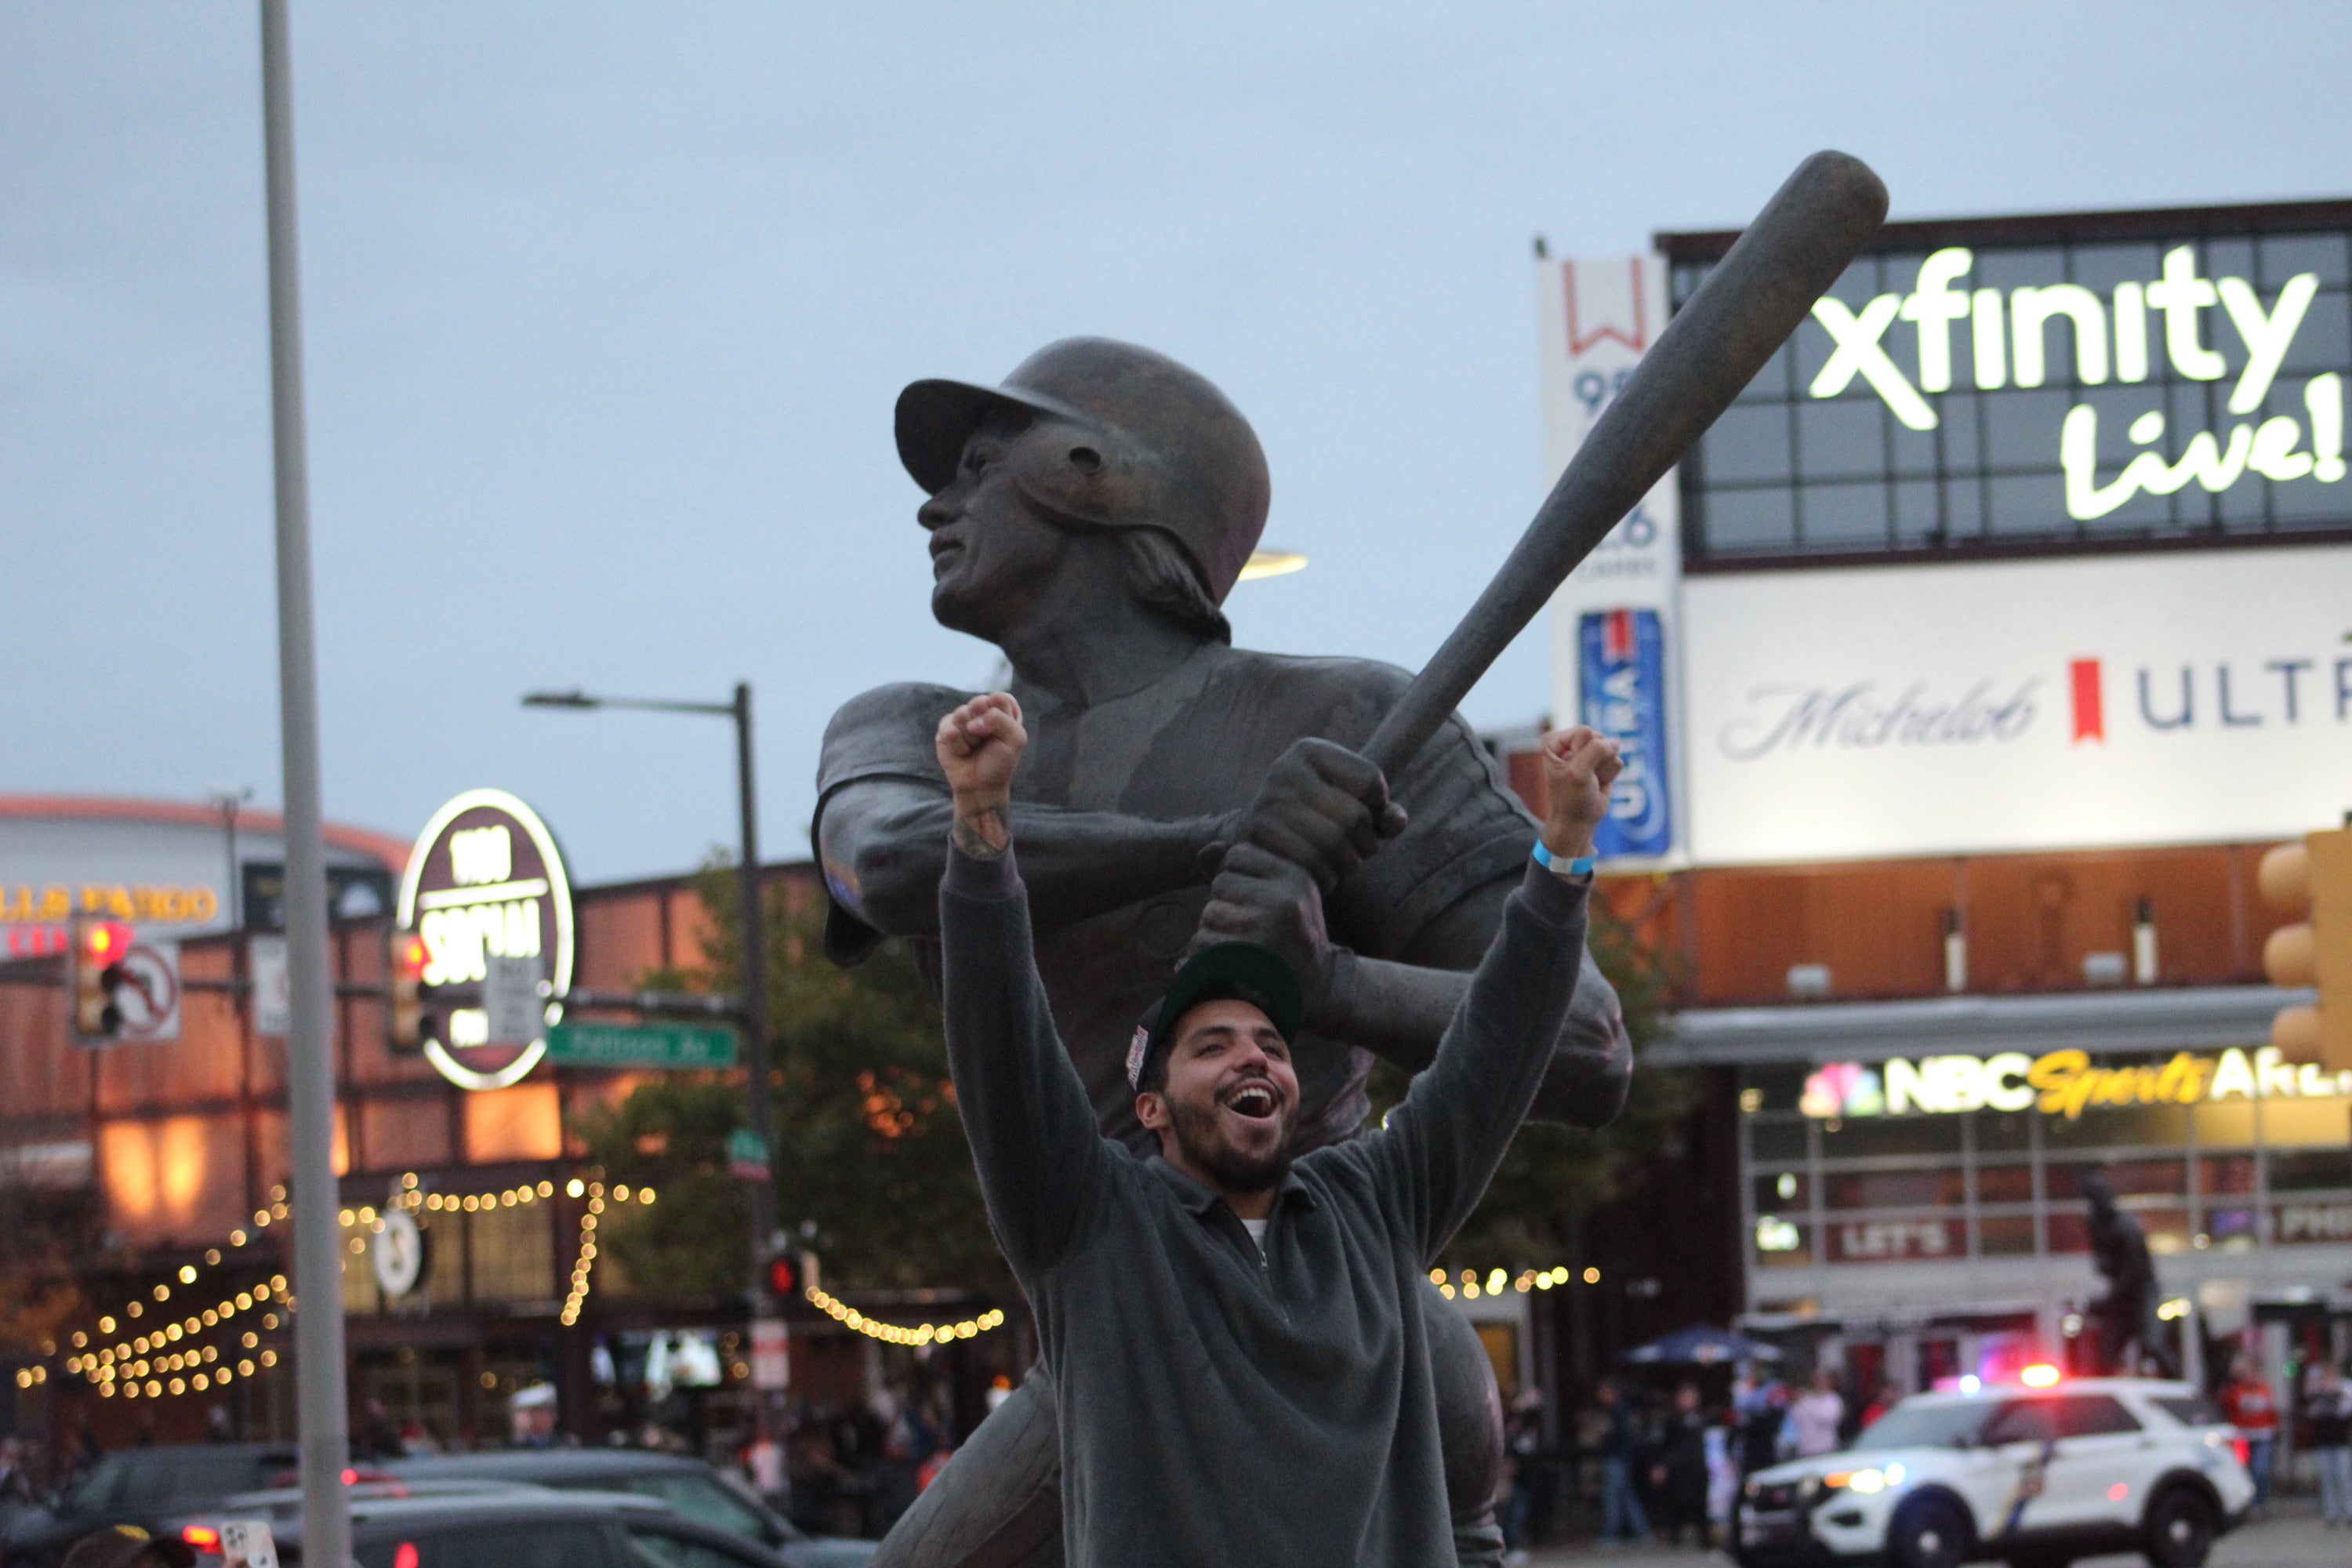 A man raises his arms in front of the Steve Carlton statue outside of Citizens Bank Park.